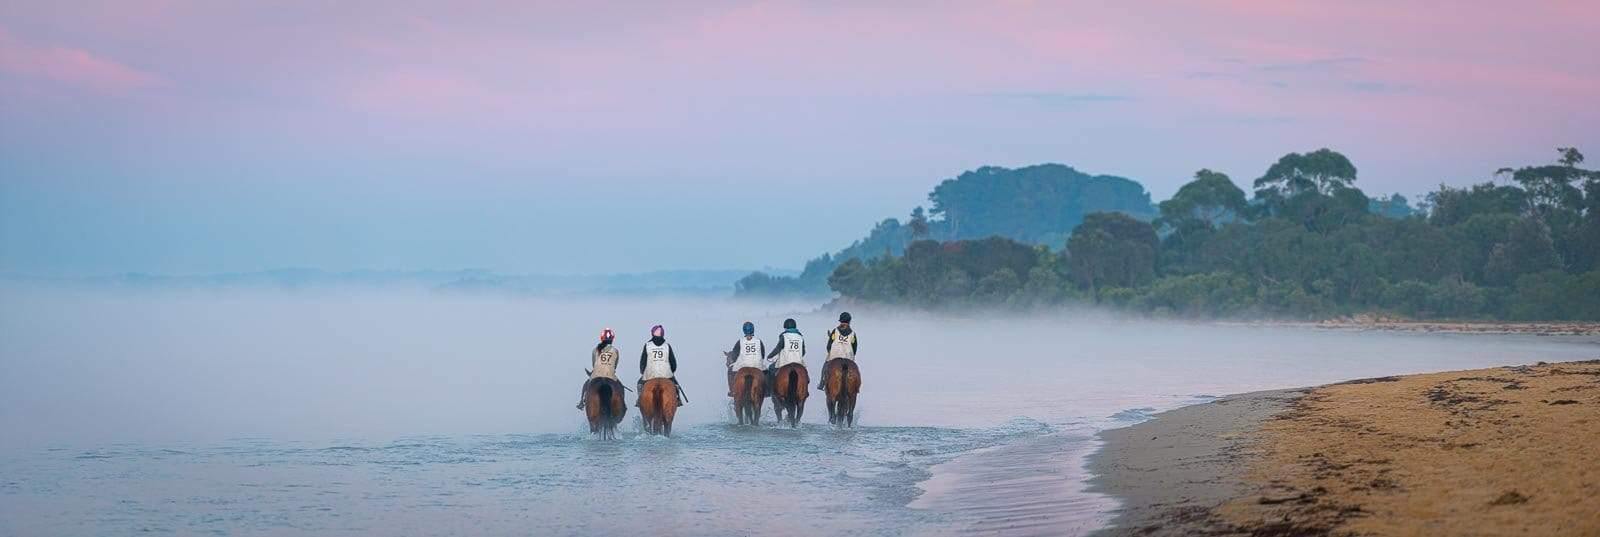 Five horses with a horseman riding on them, walking in a row with the half-feet of horses underwater, with some greenery in the right corner background, Balnarring Horses 17 - Mornington Peninsula Victoria  